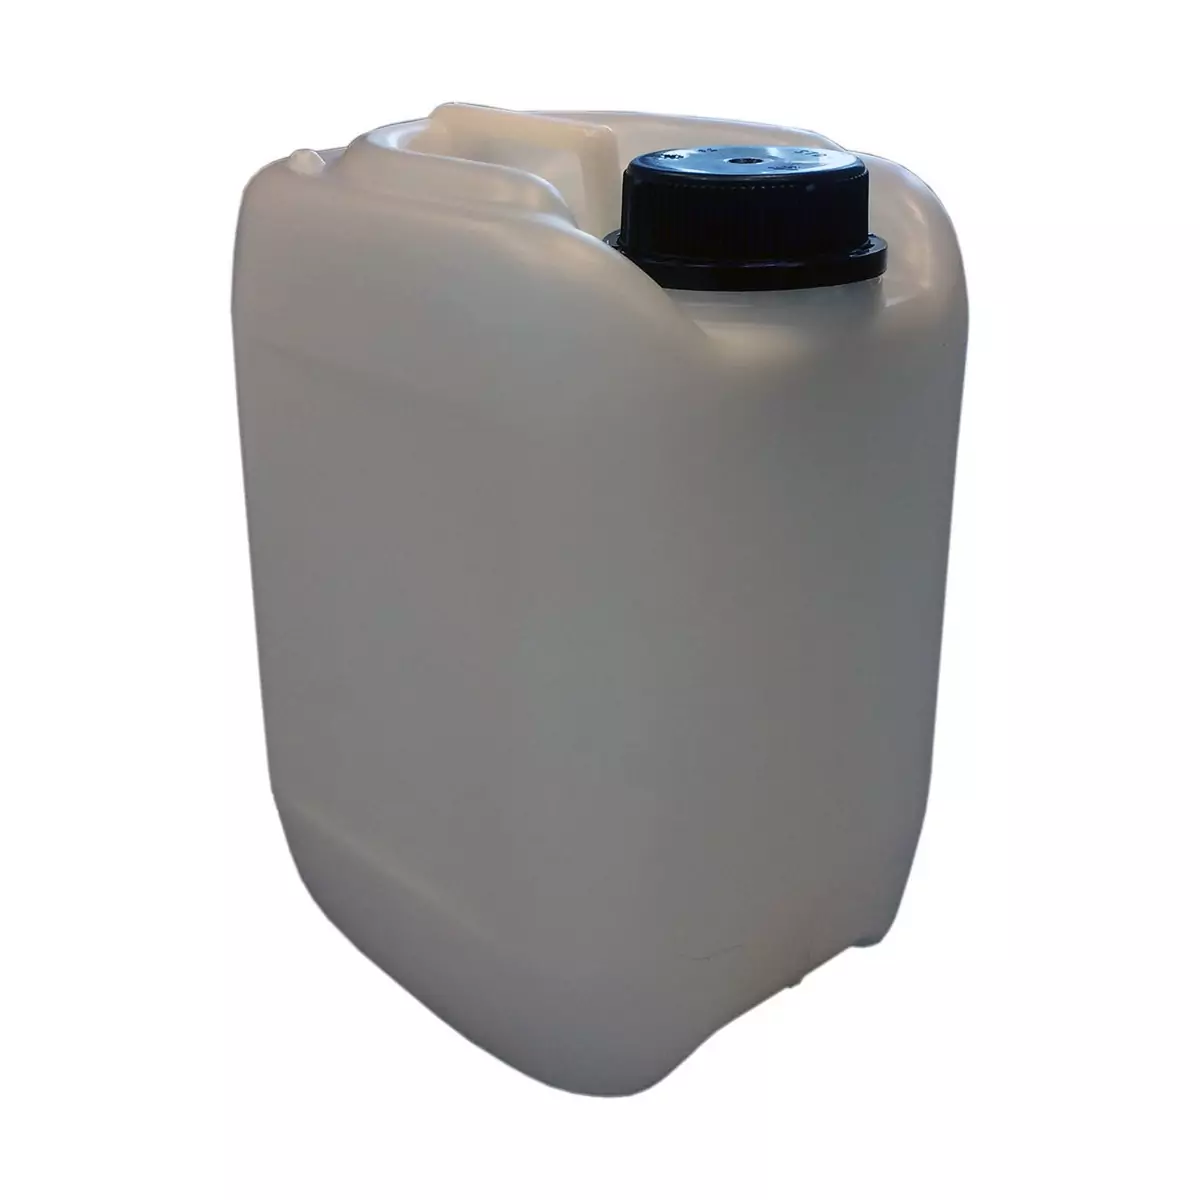 Can / Jerrycan 5 liters